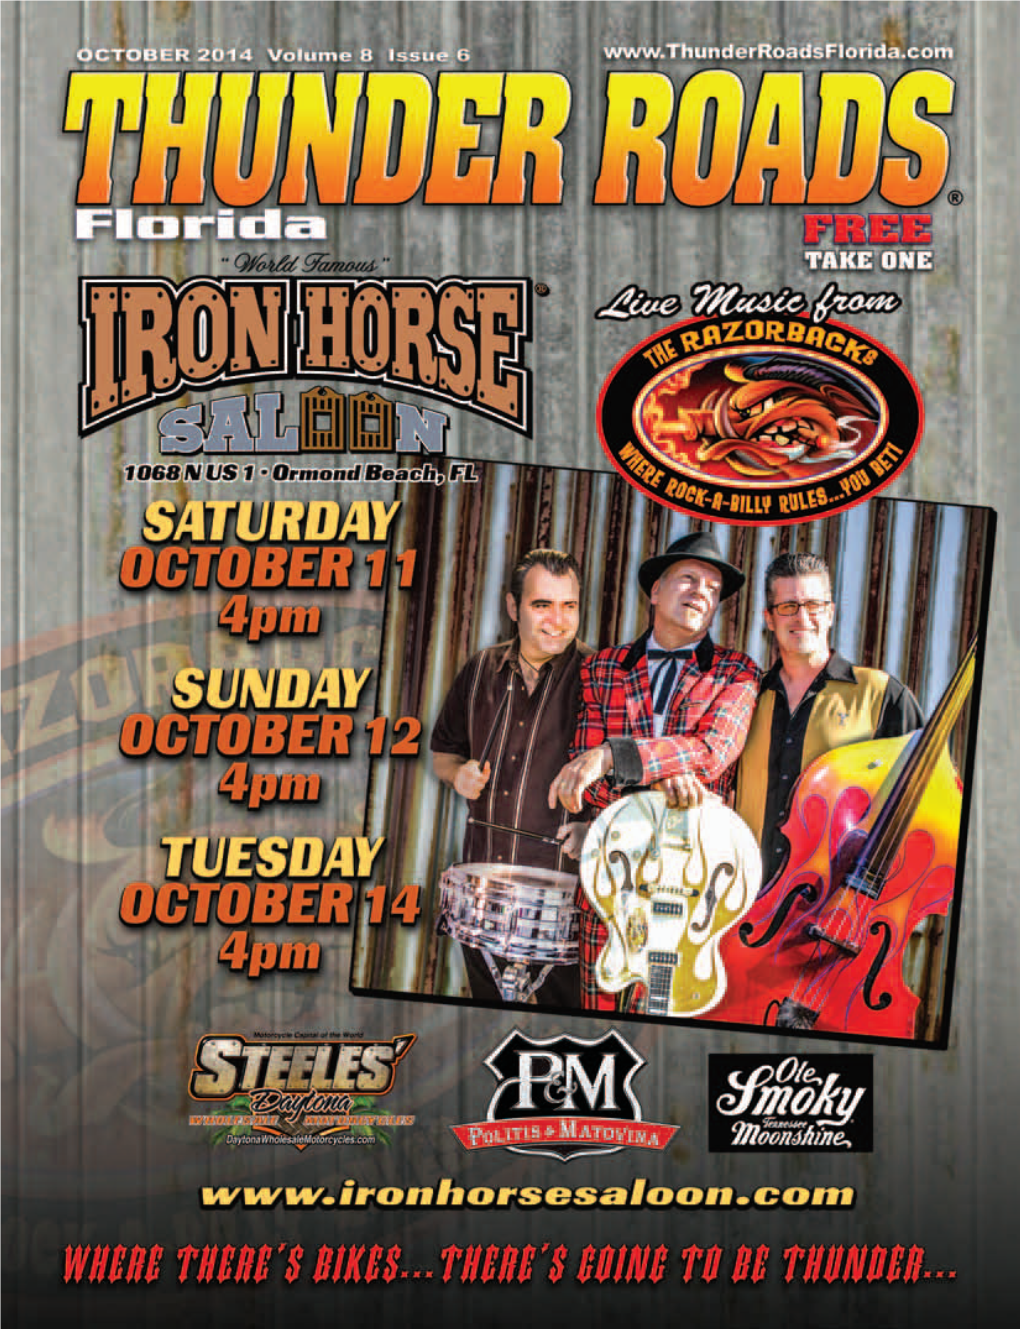 Look for Thunder Roads Magazine Florida in Our 1745 US Hwy 441 825 S